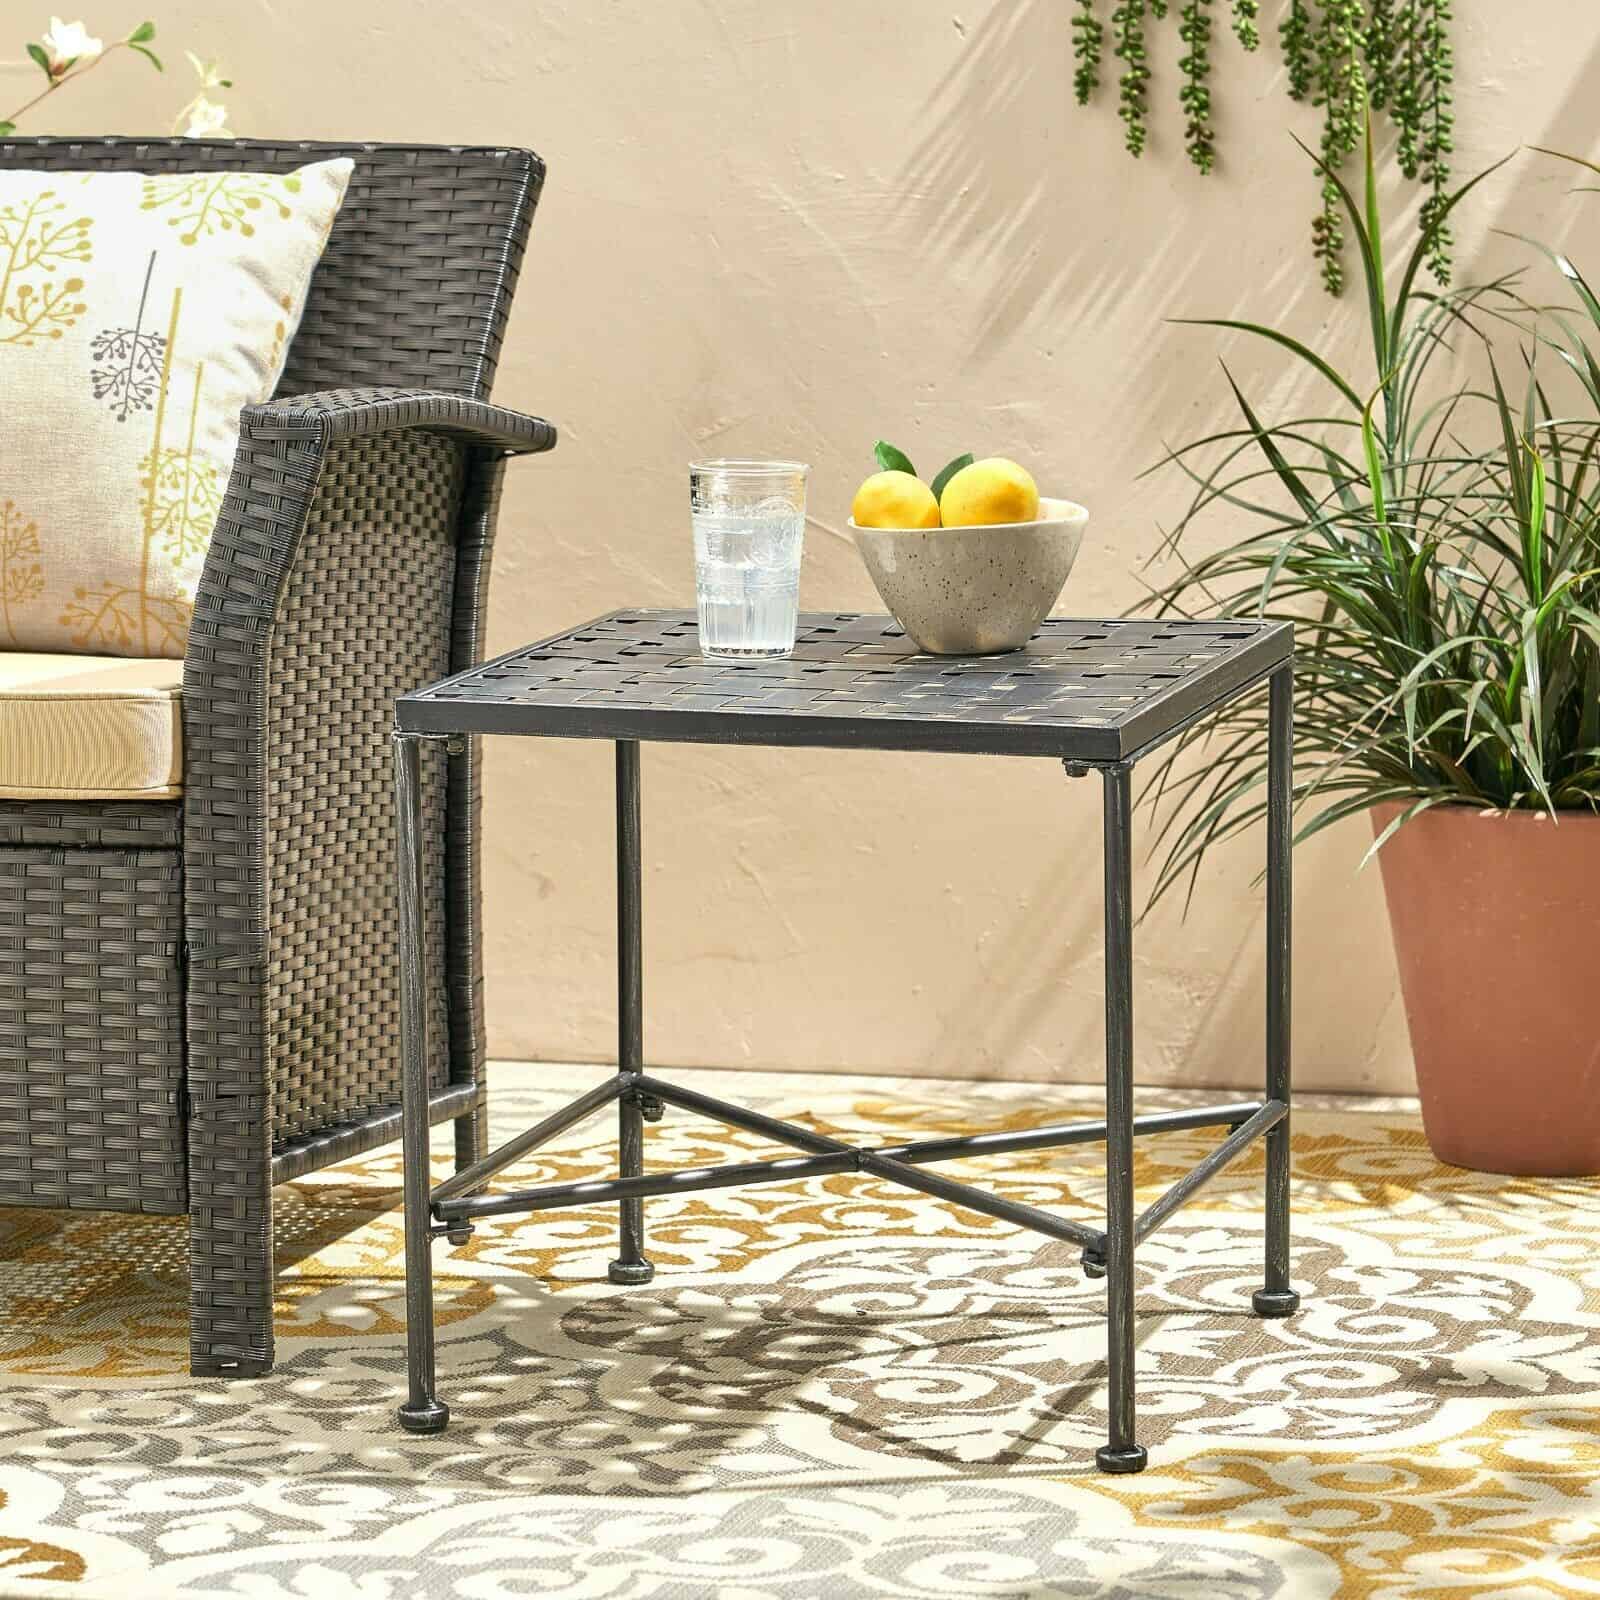 A wicker side table on a patio.